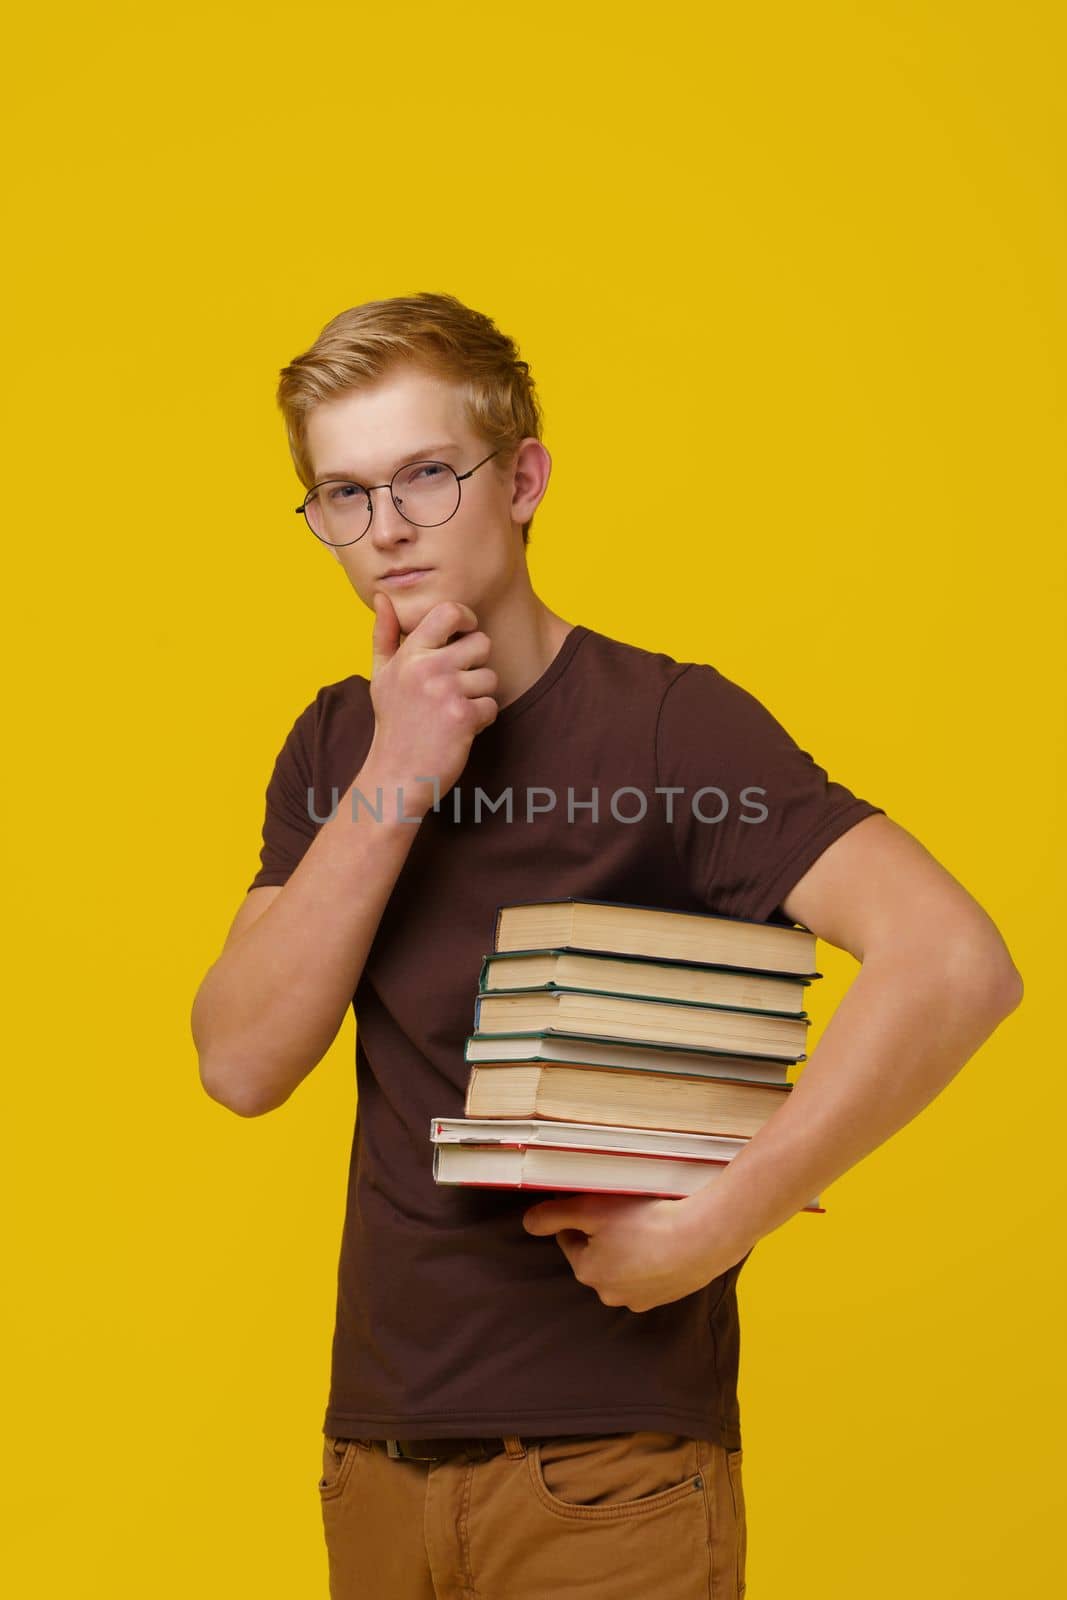 Knowledge Acquisition, Education, Concept Training. A Brooding Young European Man in a Brown T-Shirt Holds a Stack of Books in His Hand on a Yellow Background by LipikStockMedia